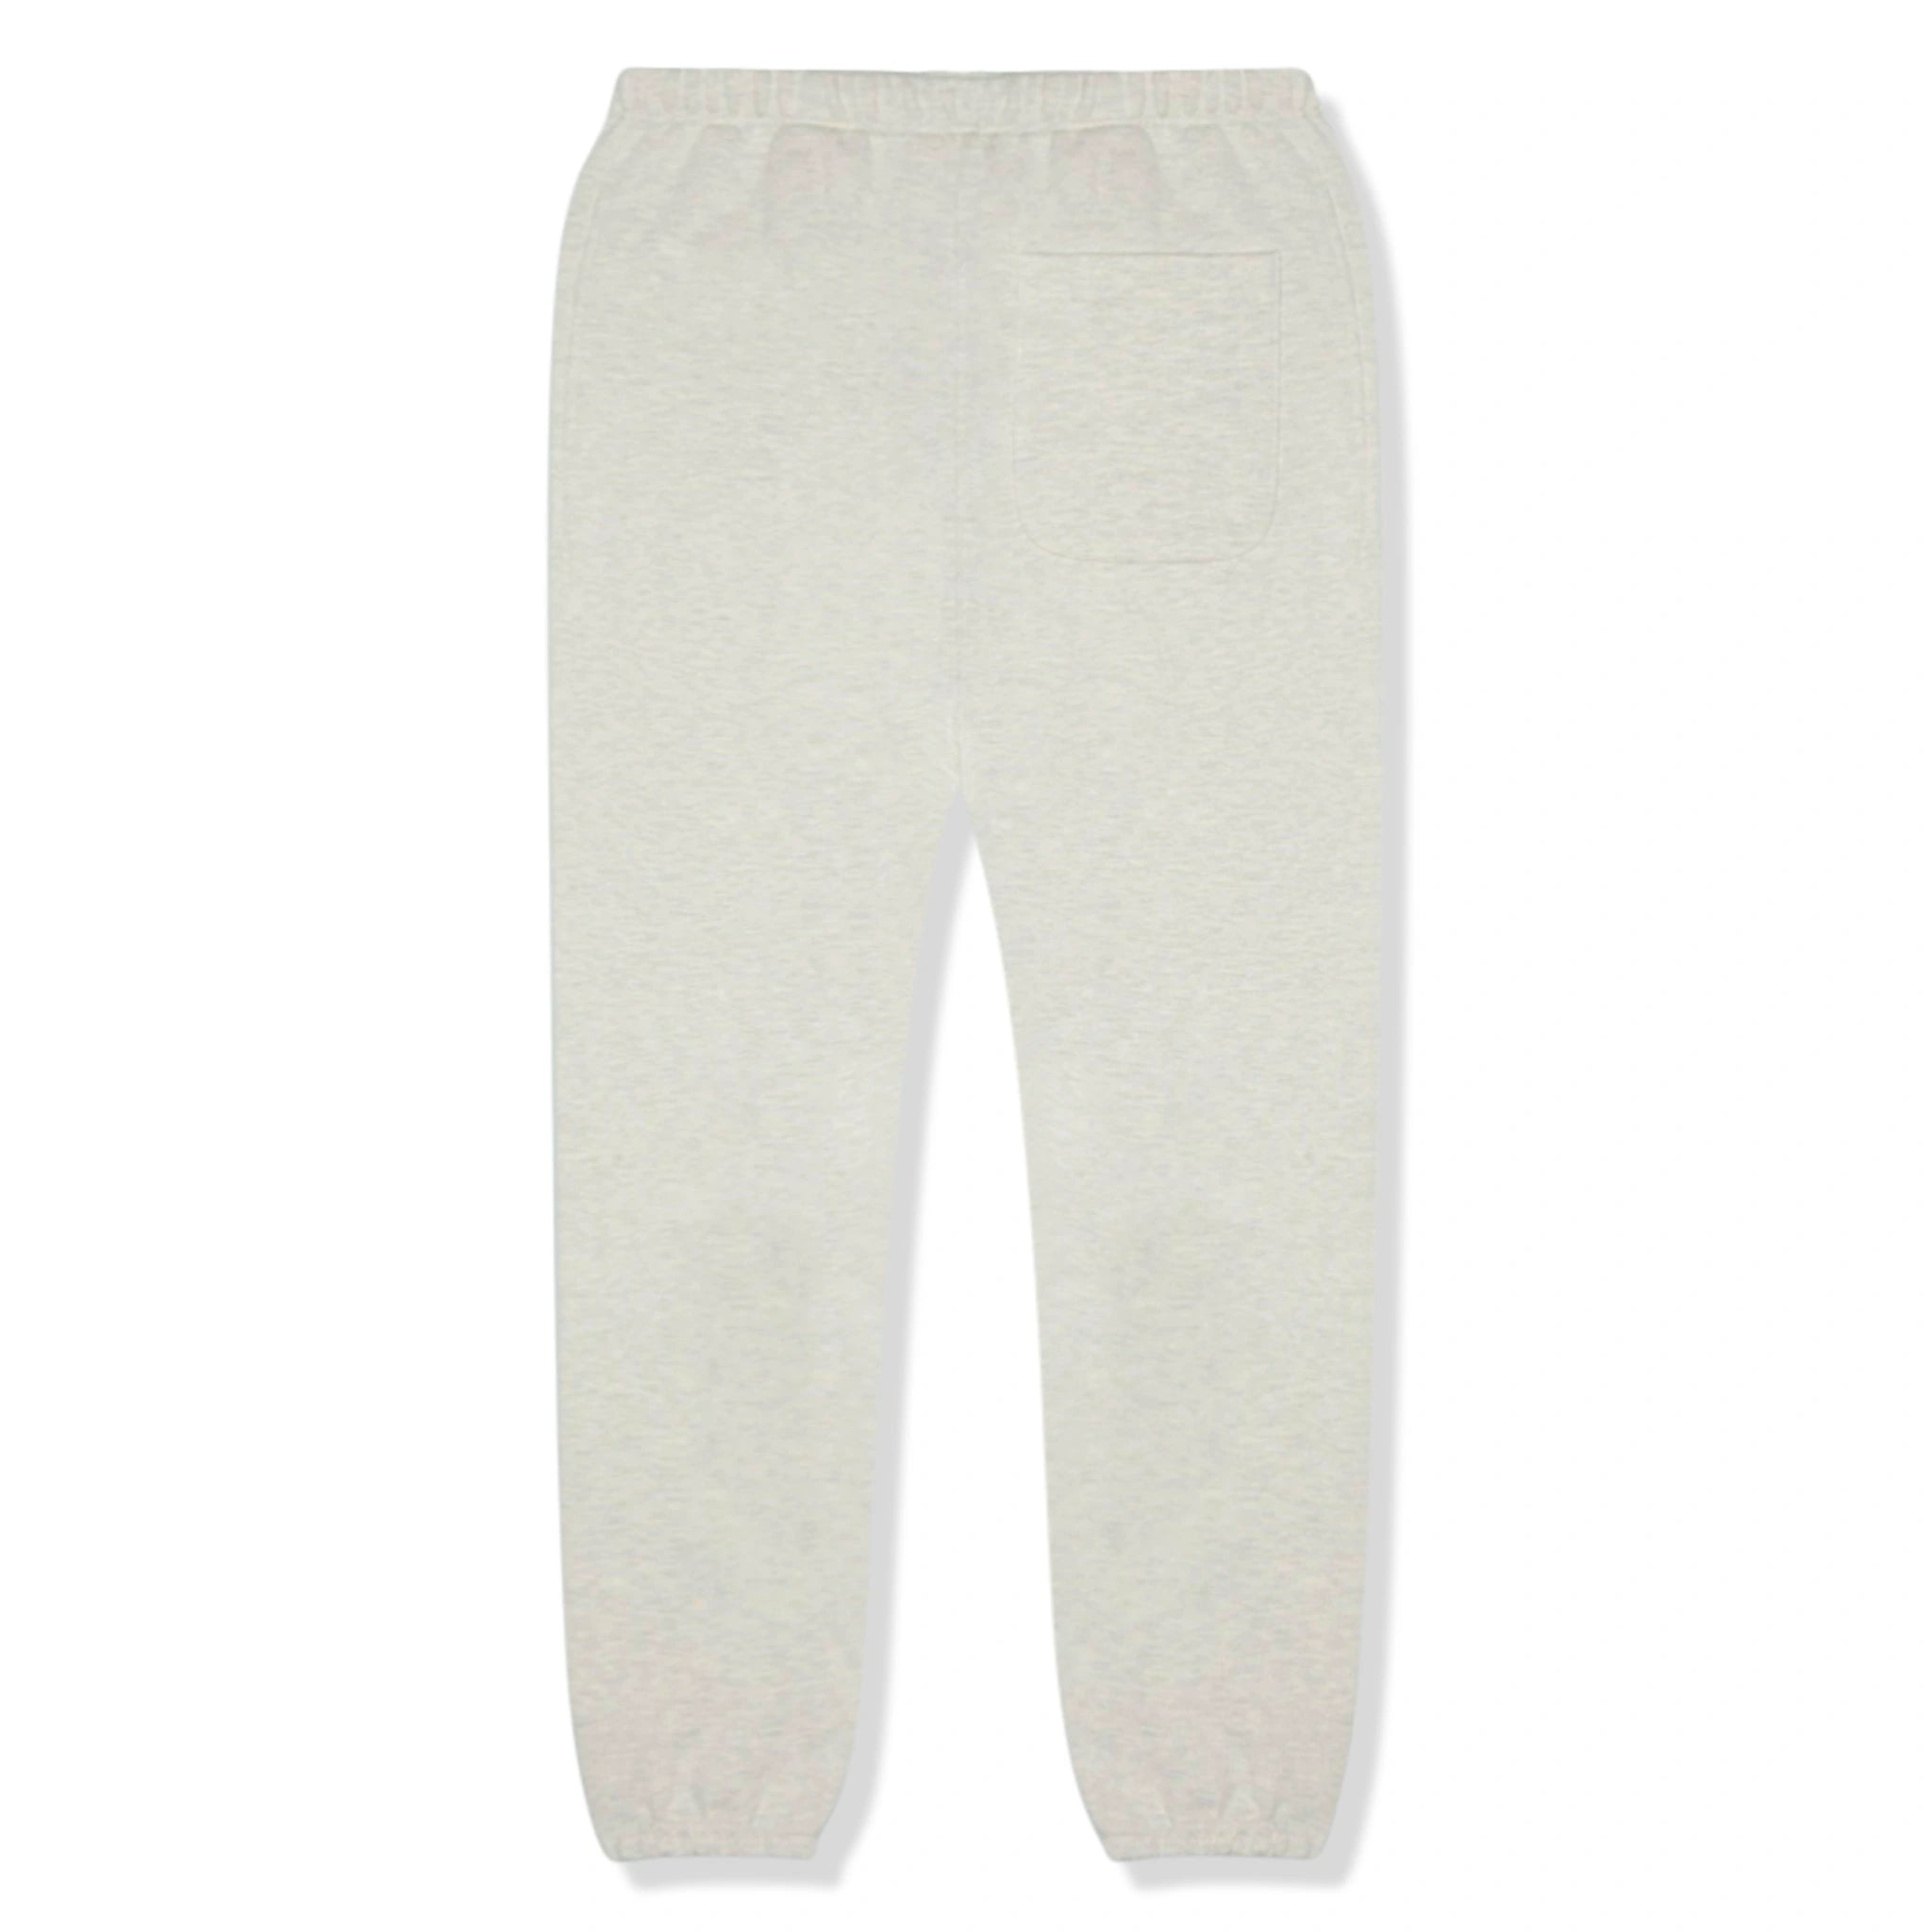 Back view of Fear Of God Essentials Oatmeal Reflective Lounge Sweatpants